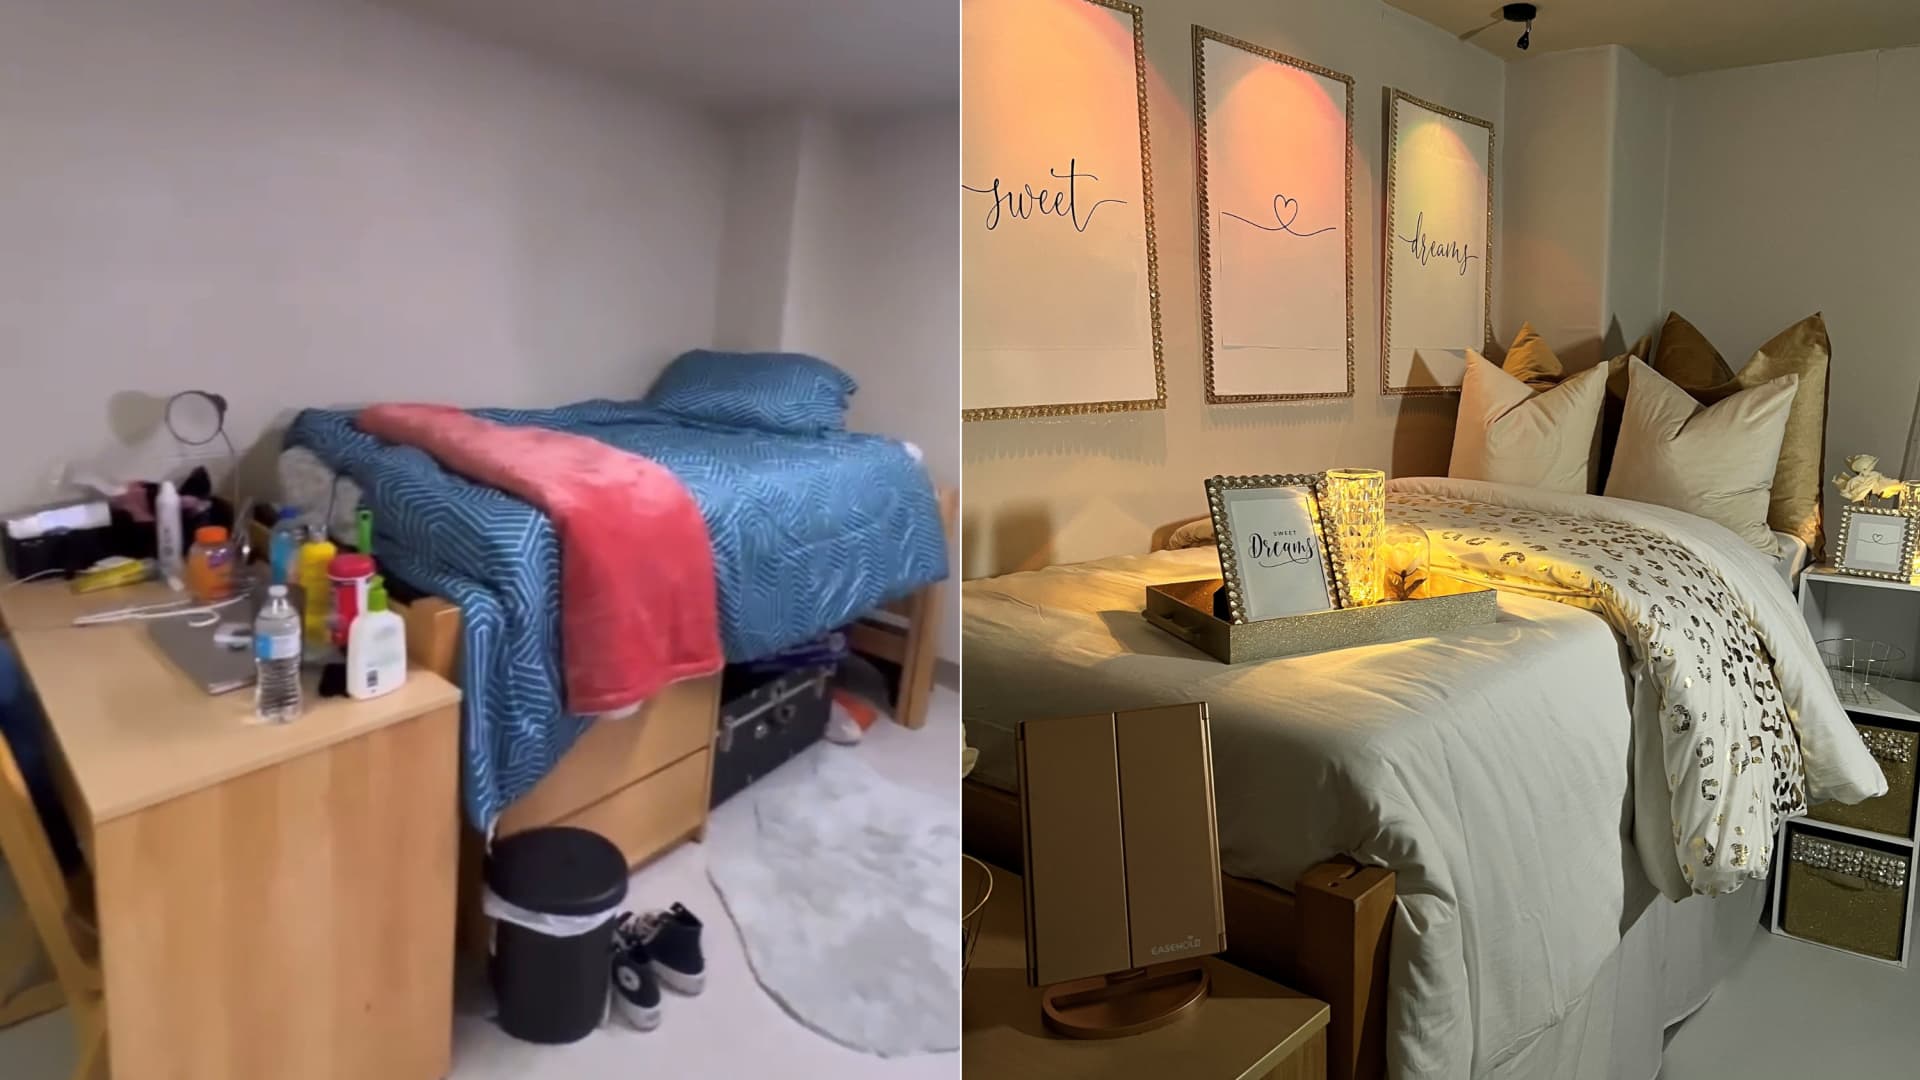 Johnson told CNBC Make It that she spent about $250 to transform her sister's roommate side of the dorm room.